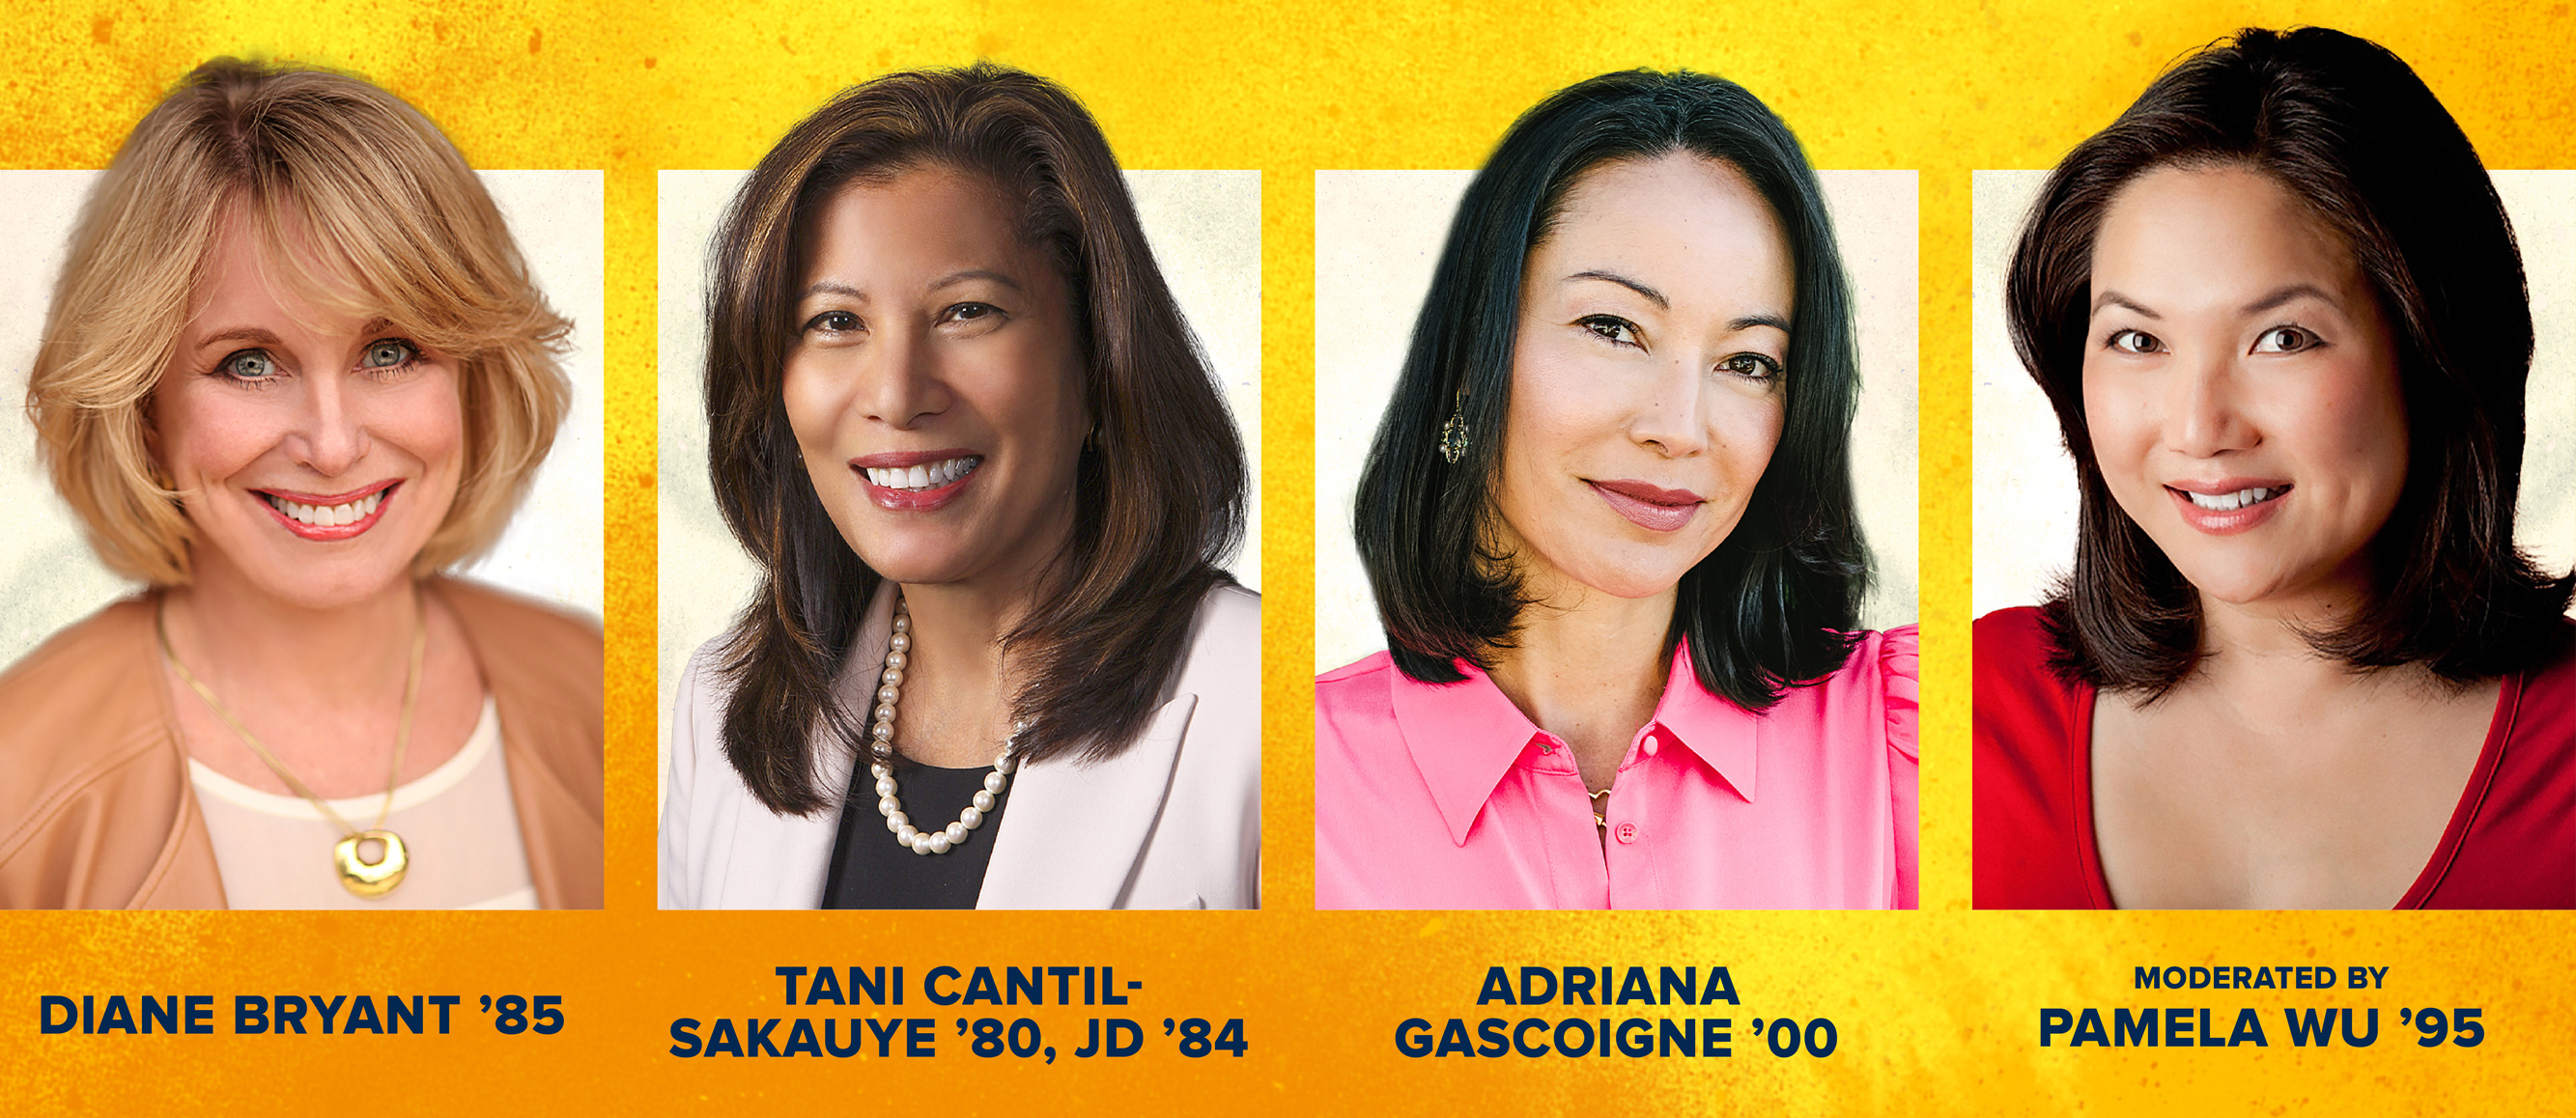 Graphic of all panelists and the moderator for the Wisdom of Women Symposium. Left to right: Diane Bryant, Chief Justice Tani Cantil-Sakauye, Adriana Gascoigne, and Pamela Wu.